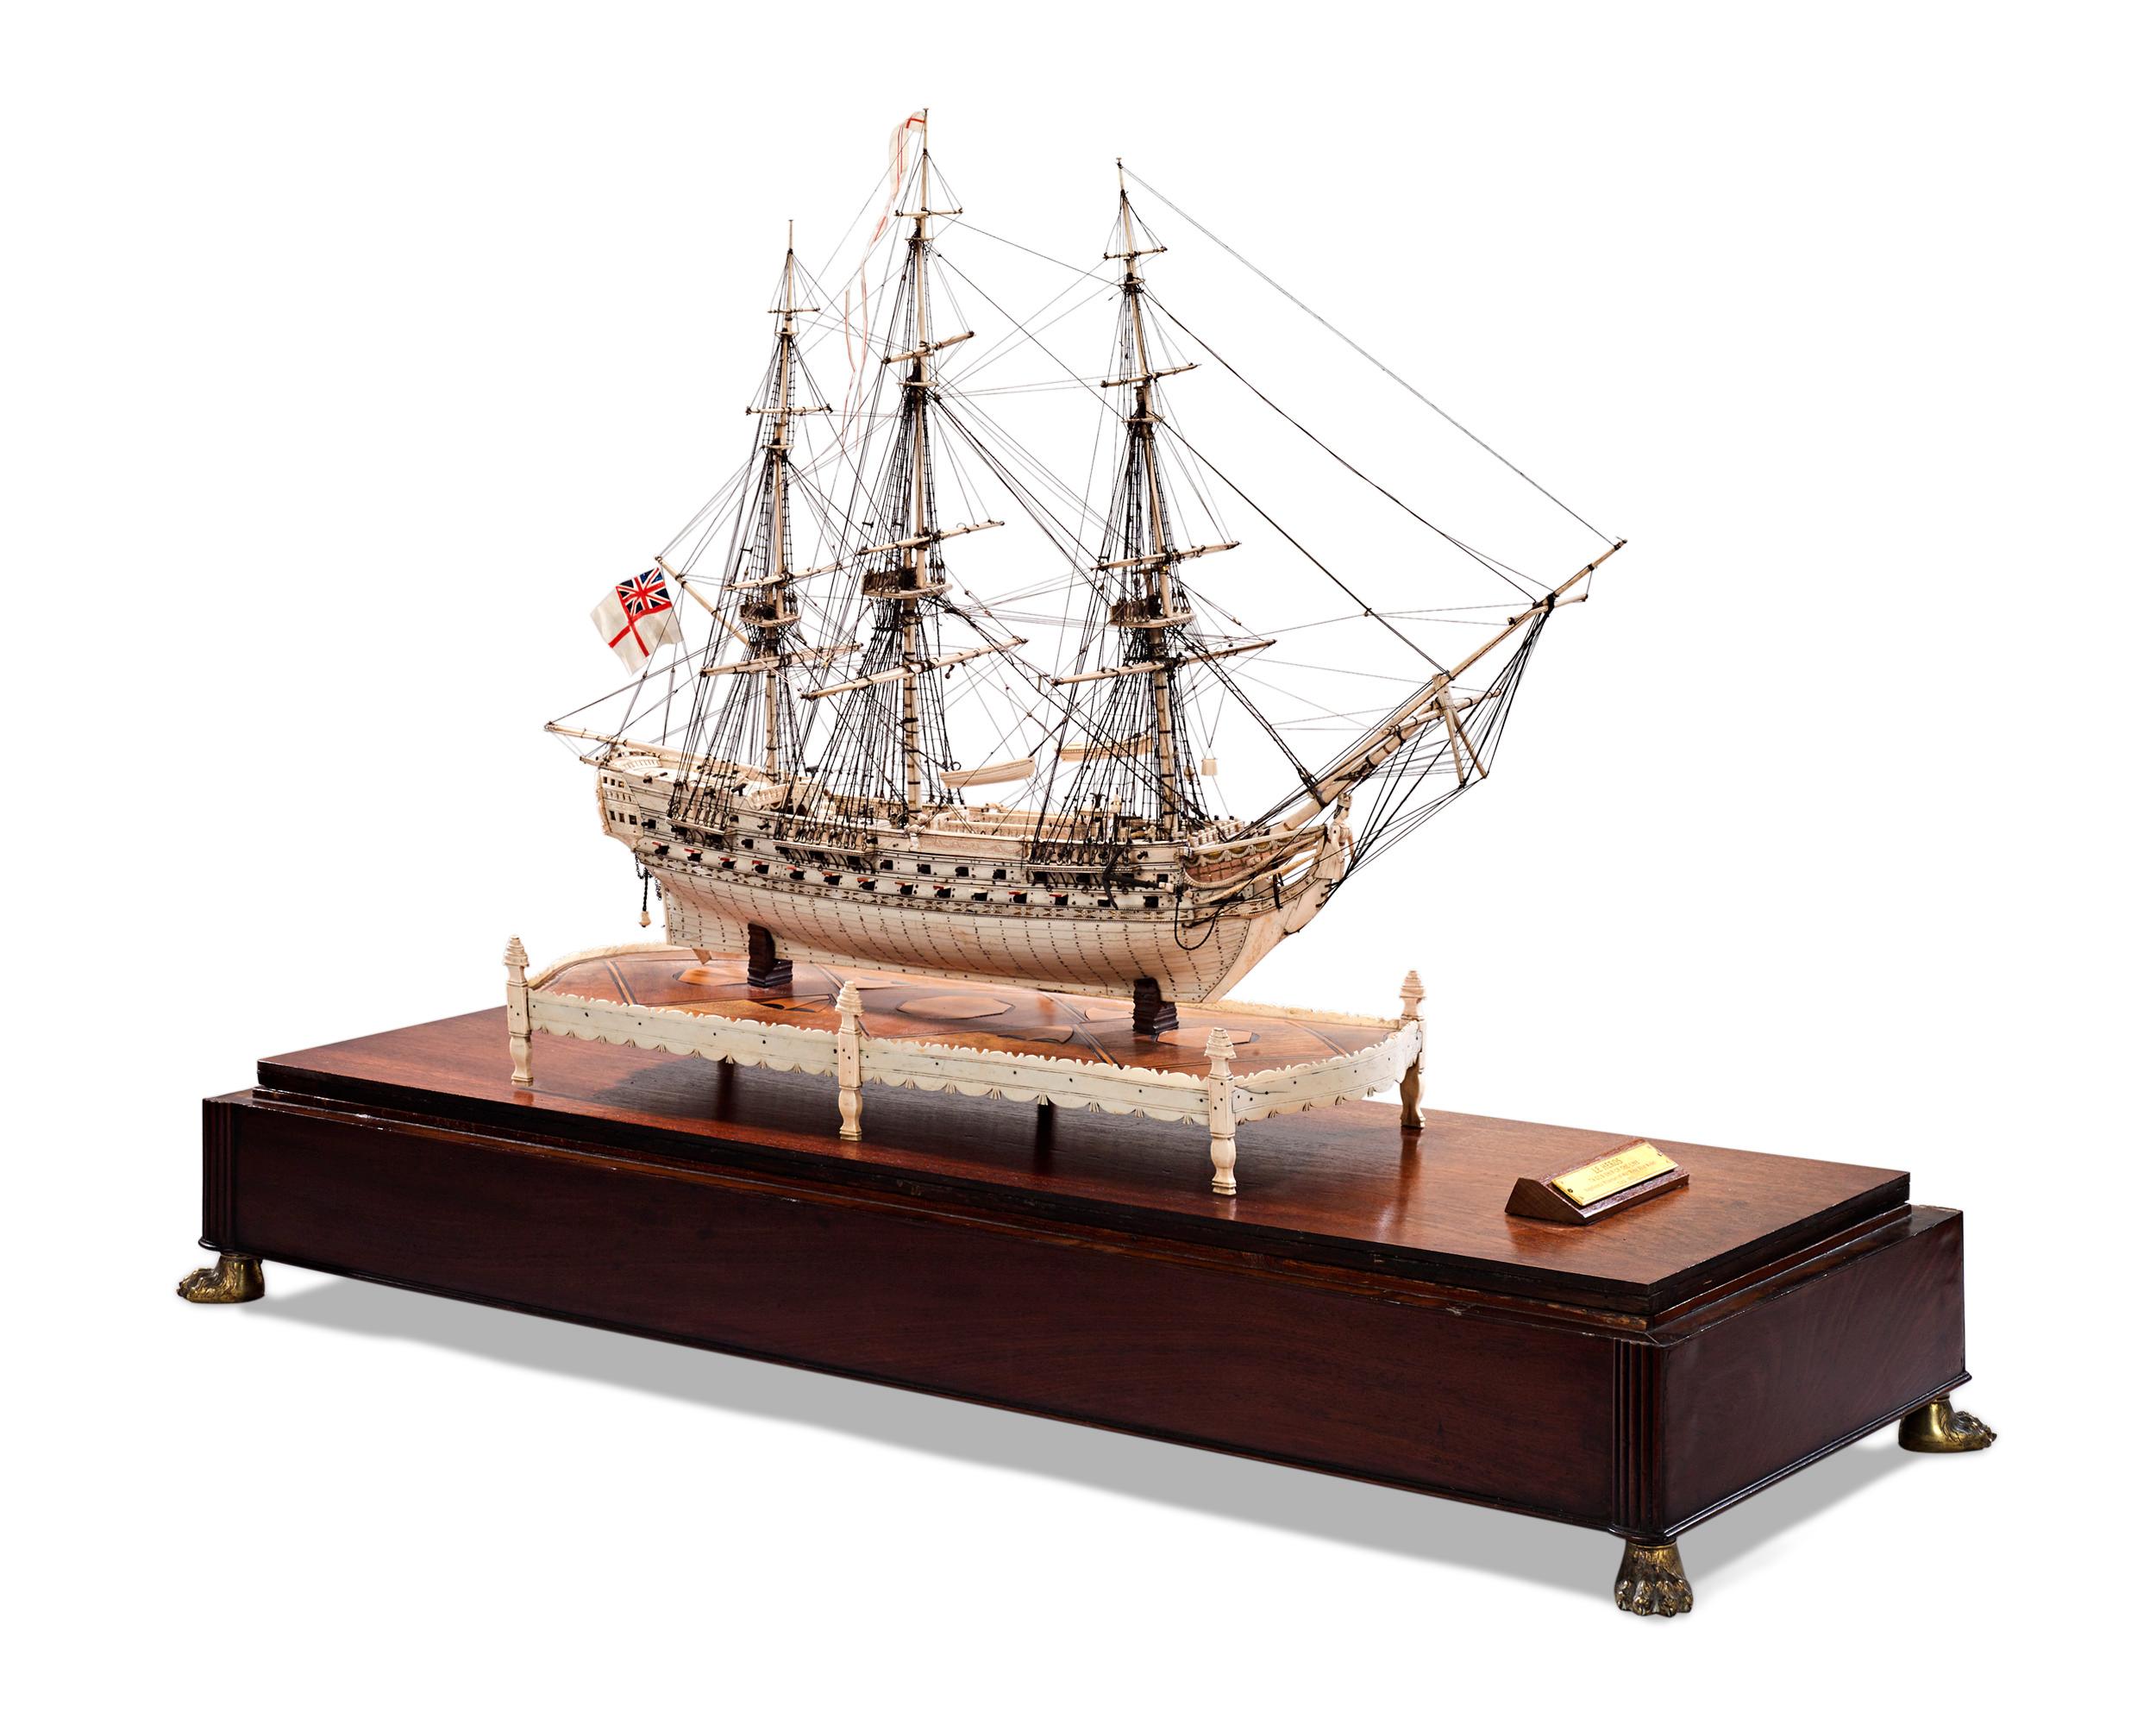 Incredibly rare and stunningly beautiful, this intricately carved ship model was created by a French prisoner during the Napoléonic Wars. Entitled 